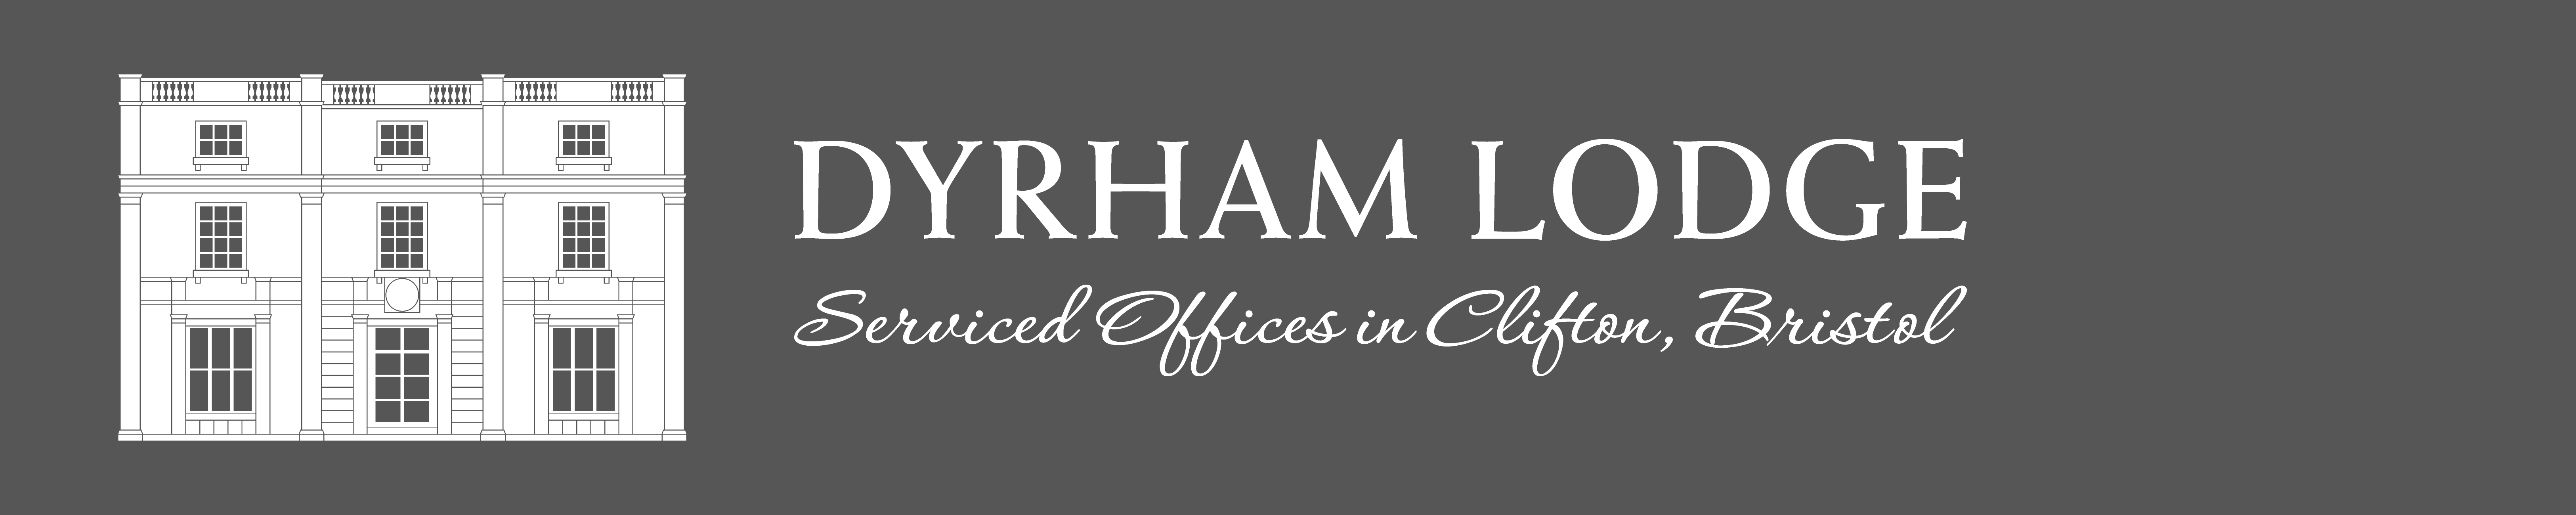 Dyrham Lodge Serviced Offices in Clifton BS8